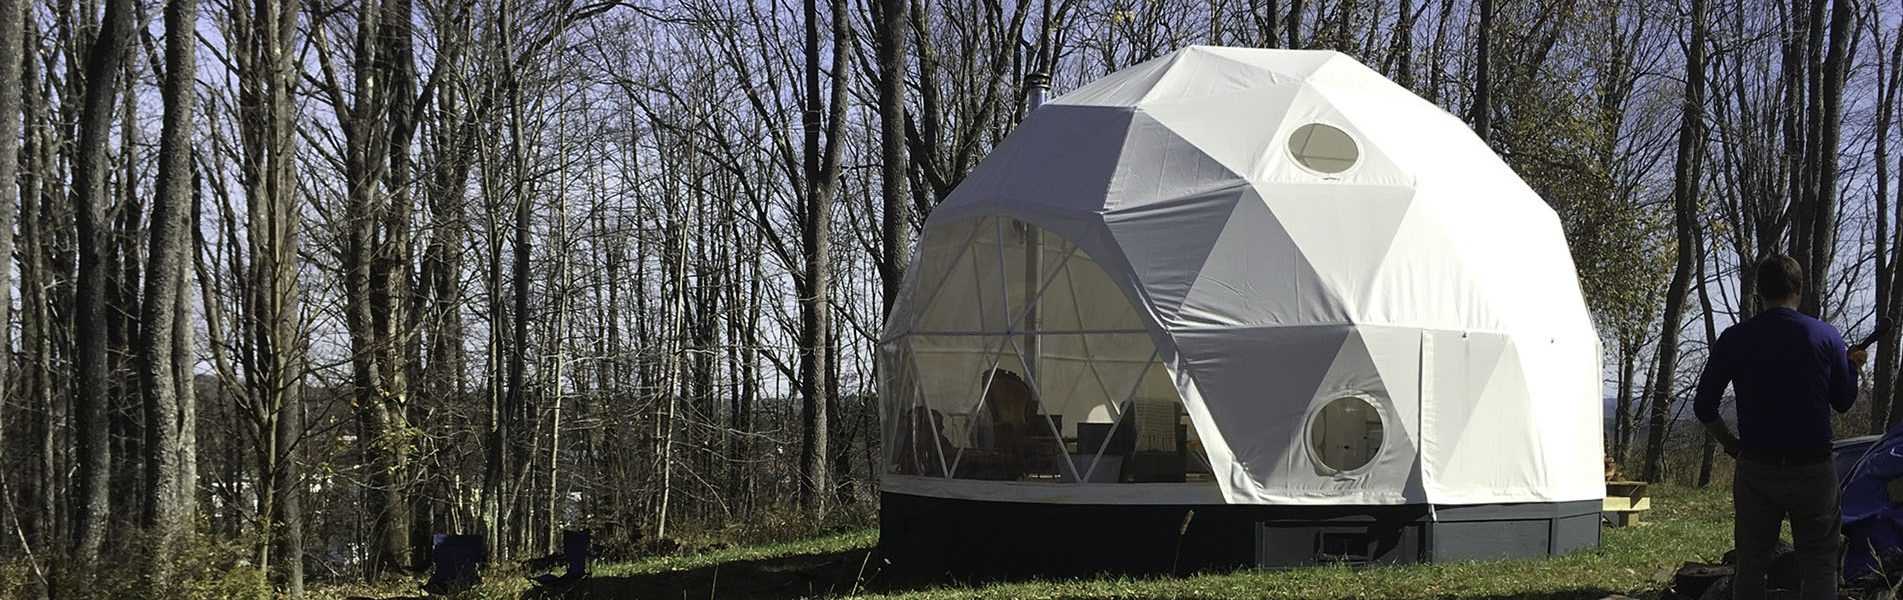 Geodesic Dome Home Specifications and FAQ'S